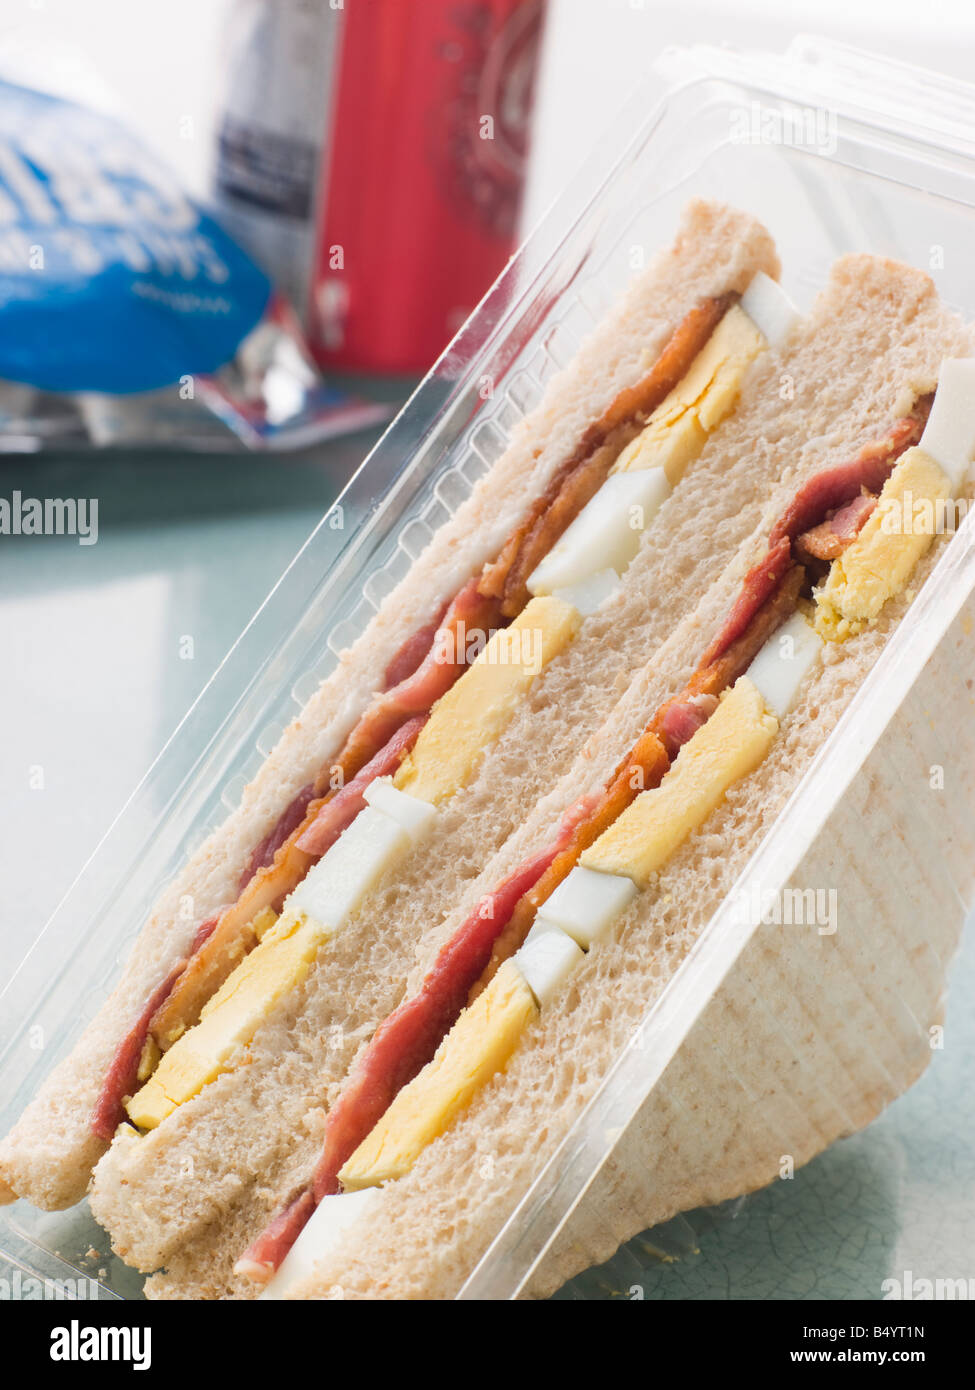 Egg And Bacon Sandwich On White Bread With A Bag Of Crisps And A Can Of Fizzy Drink Stock Photo